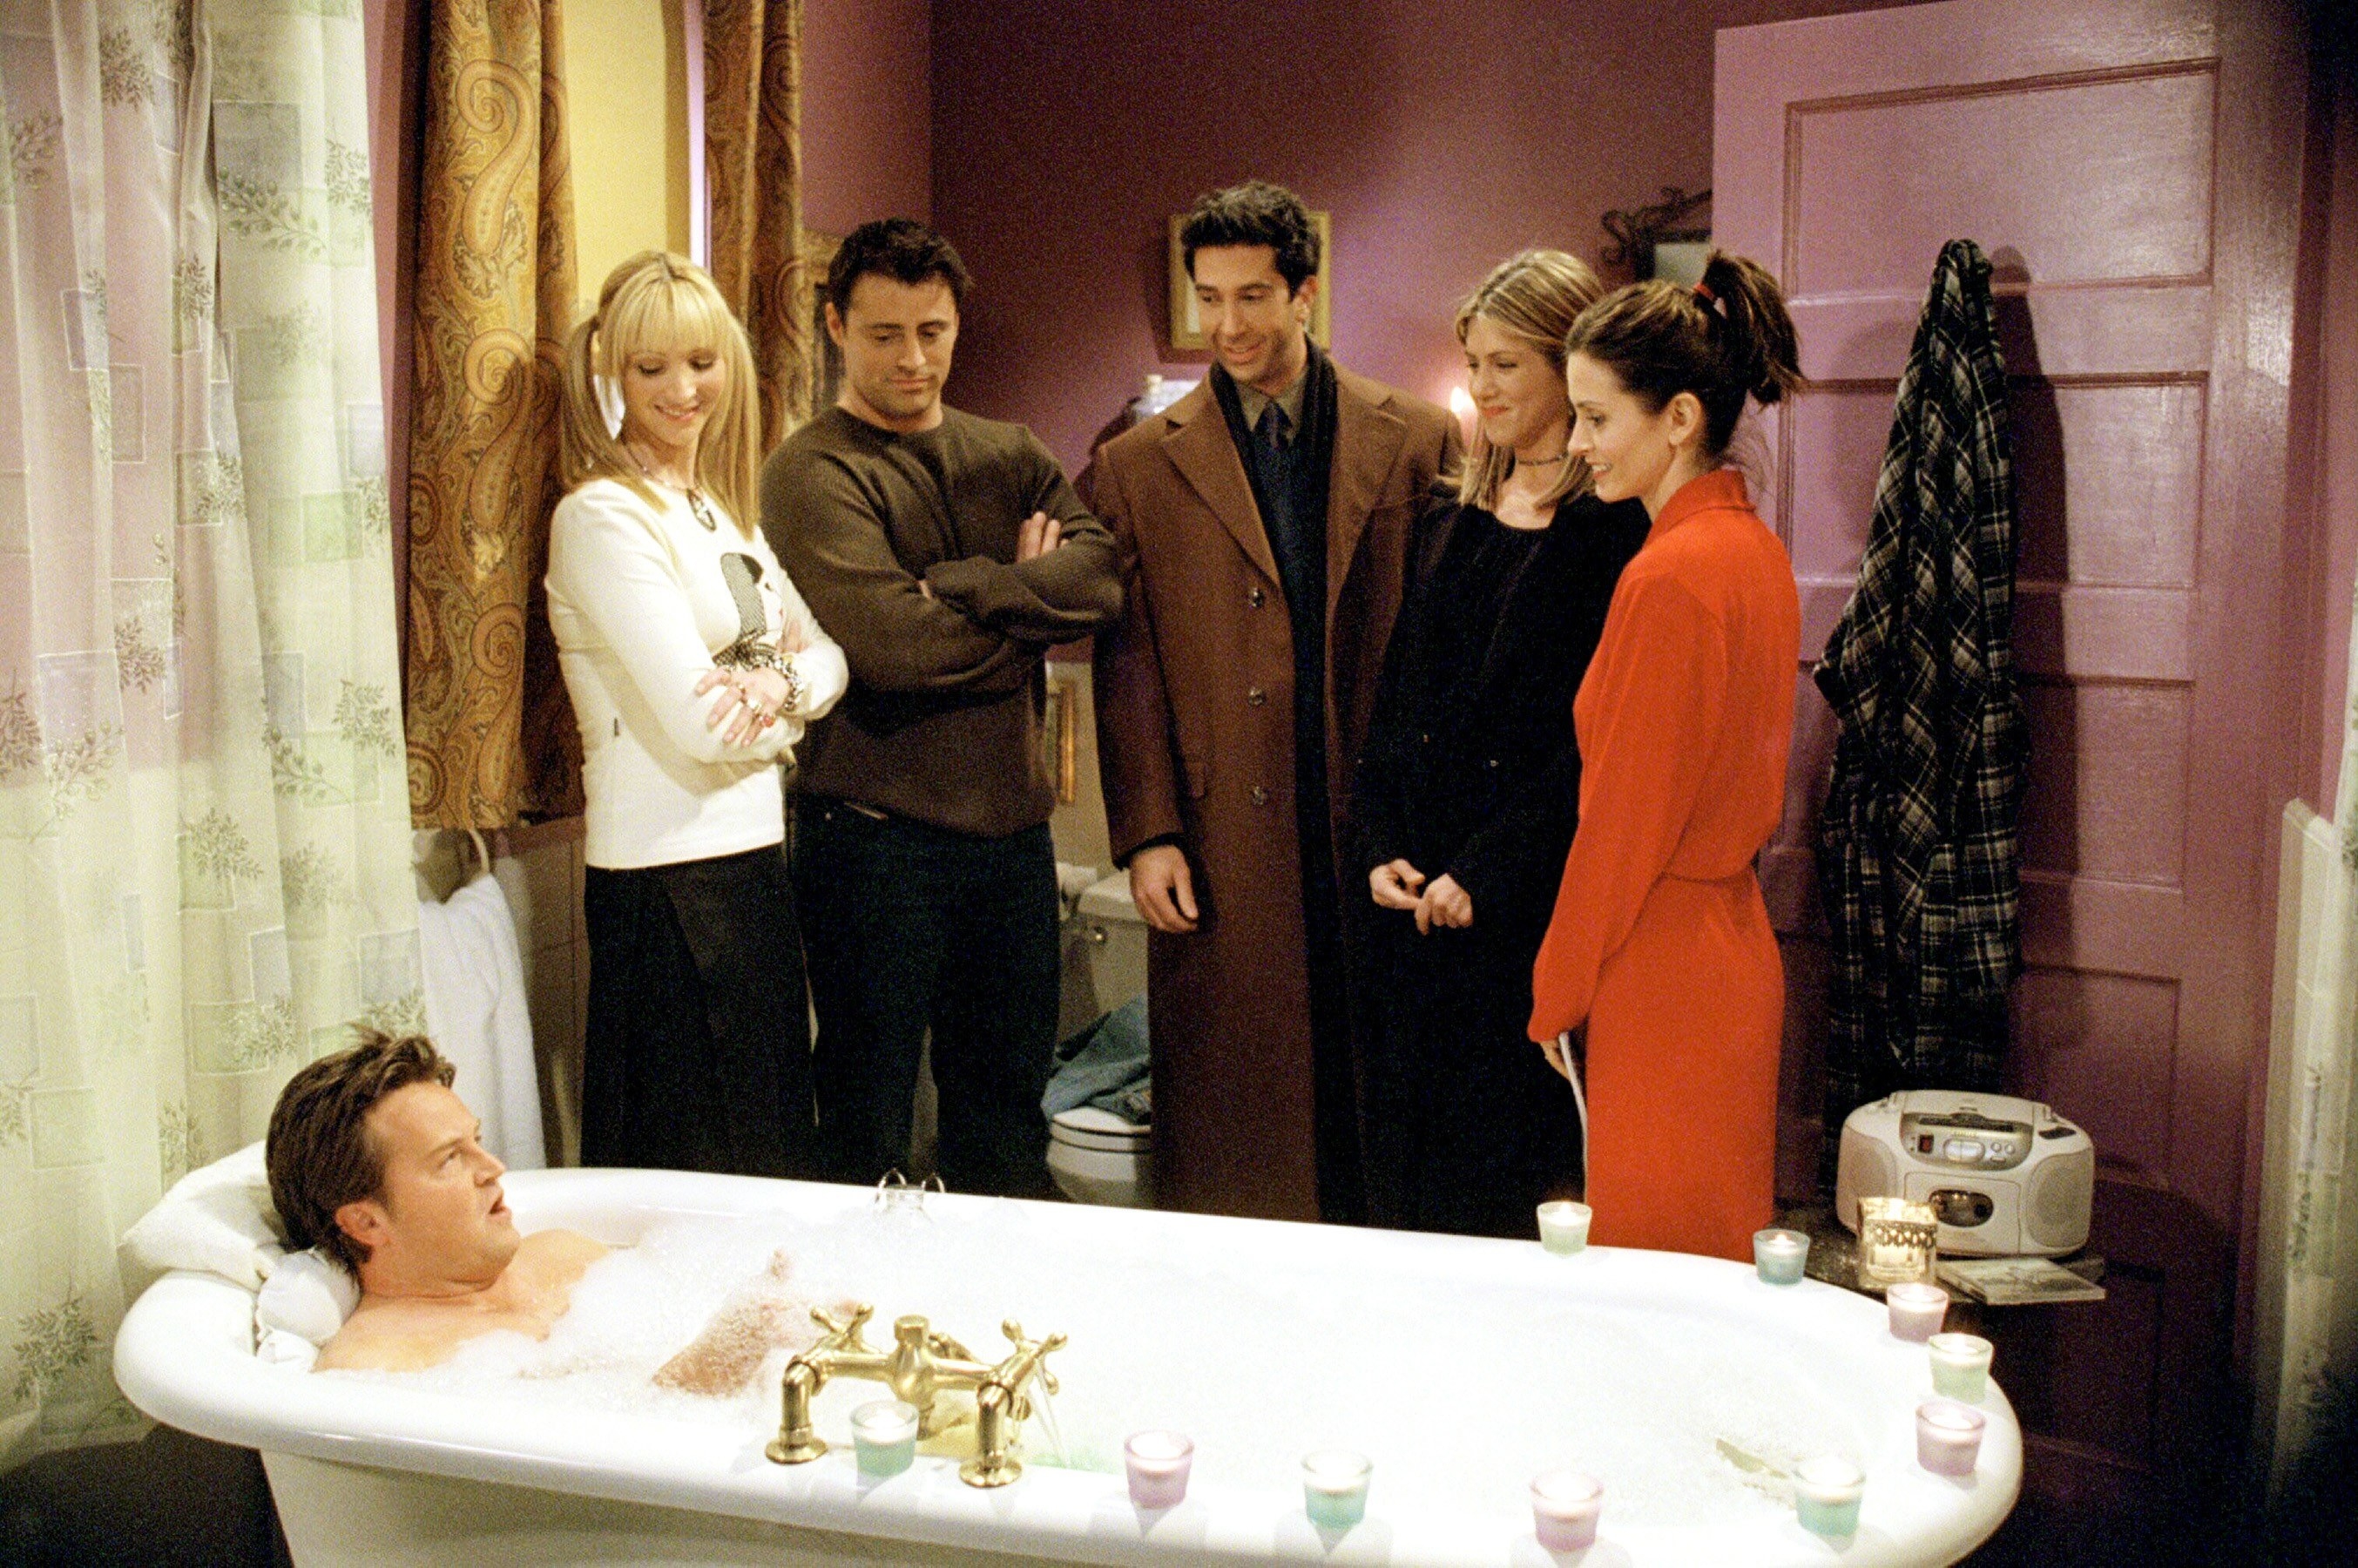 Chandler in the bath with his friends around him